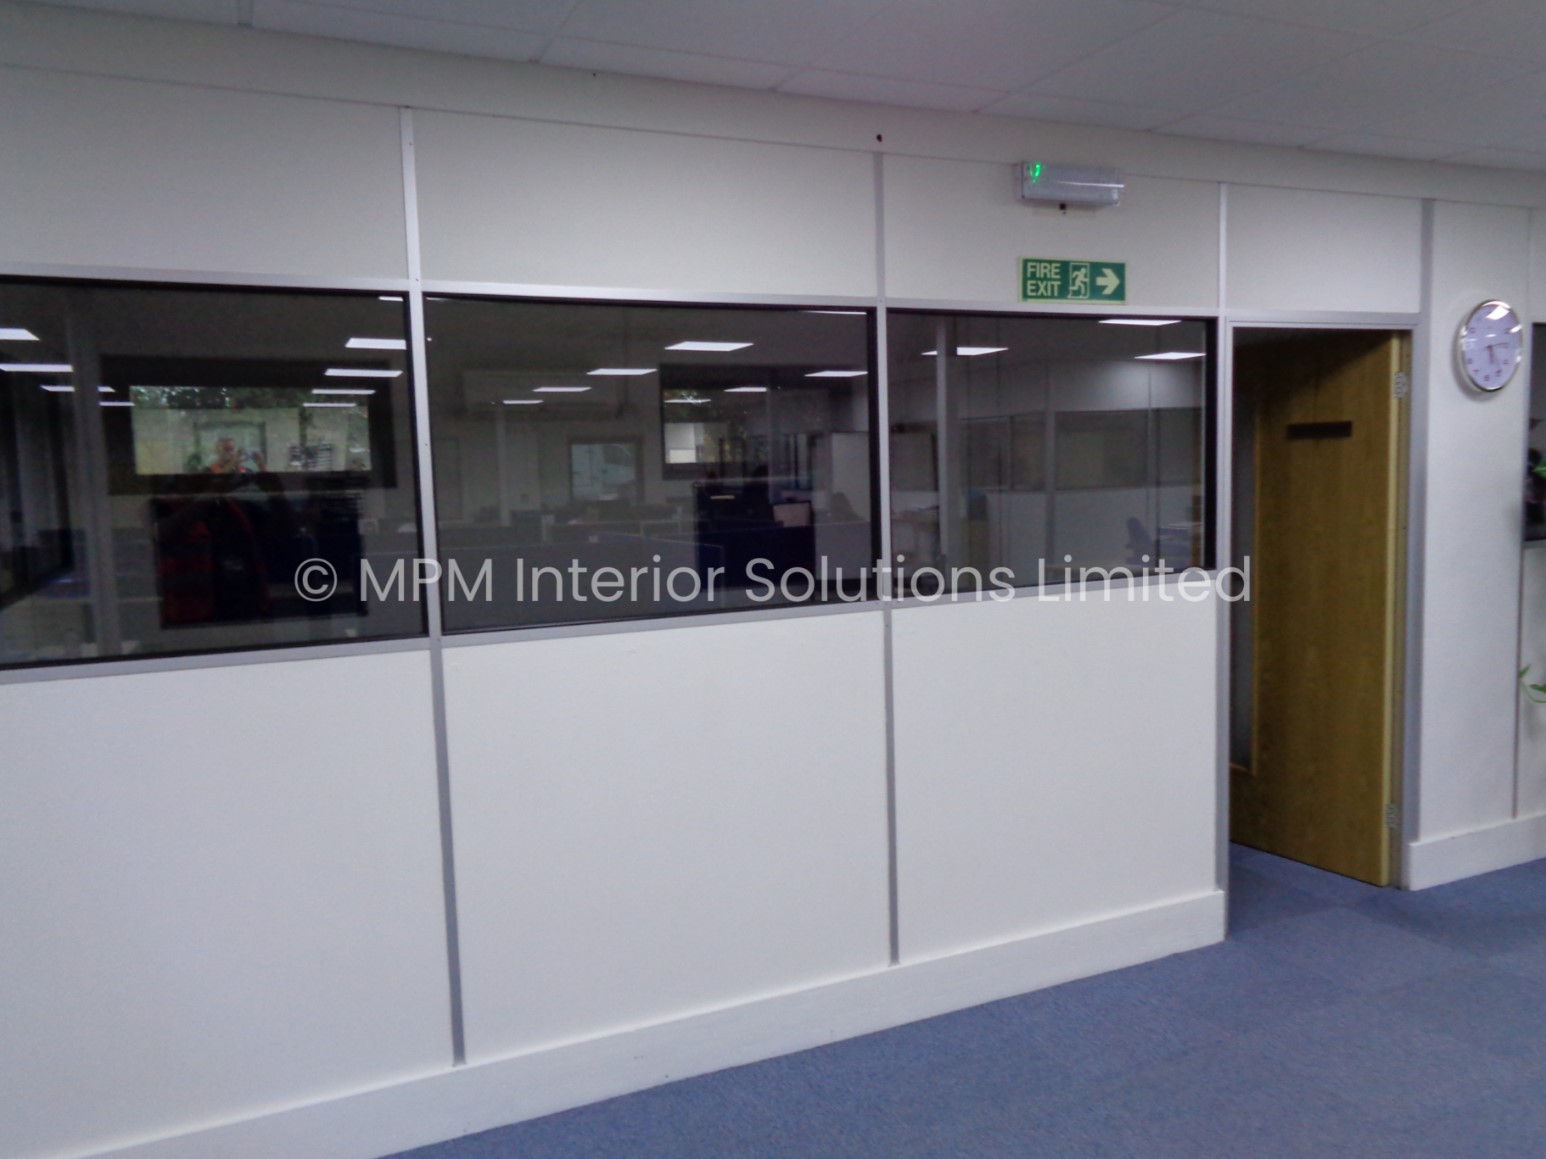 Office Refurbishment/Fit-Out, 50mm Demountable Office Partitioning, Keysource Ltd (Horsham, West Sussex), MPM Interior Solutions Limited